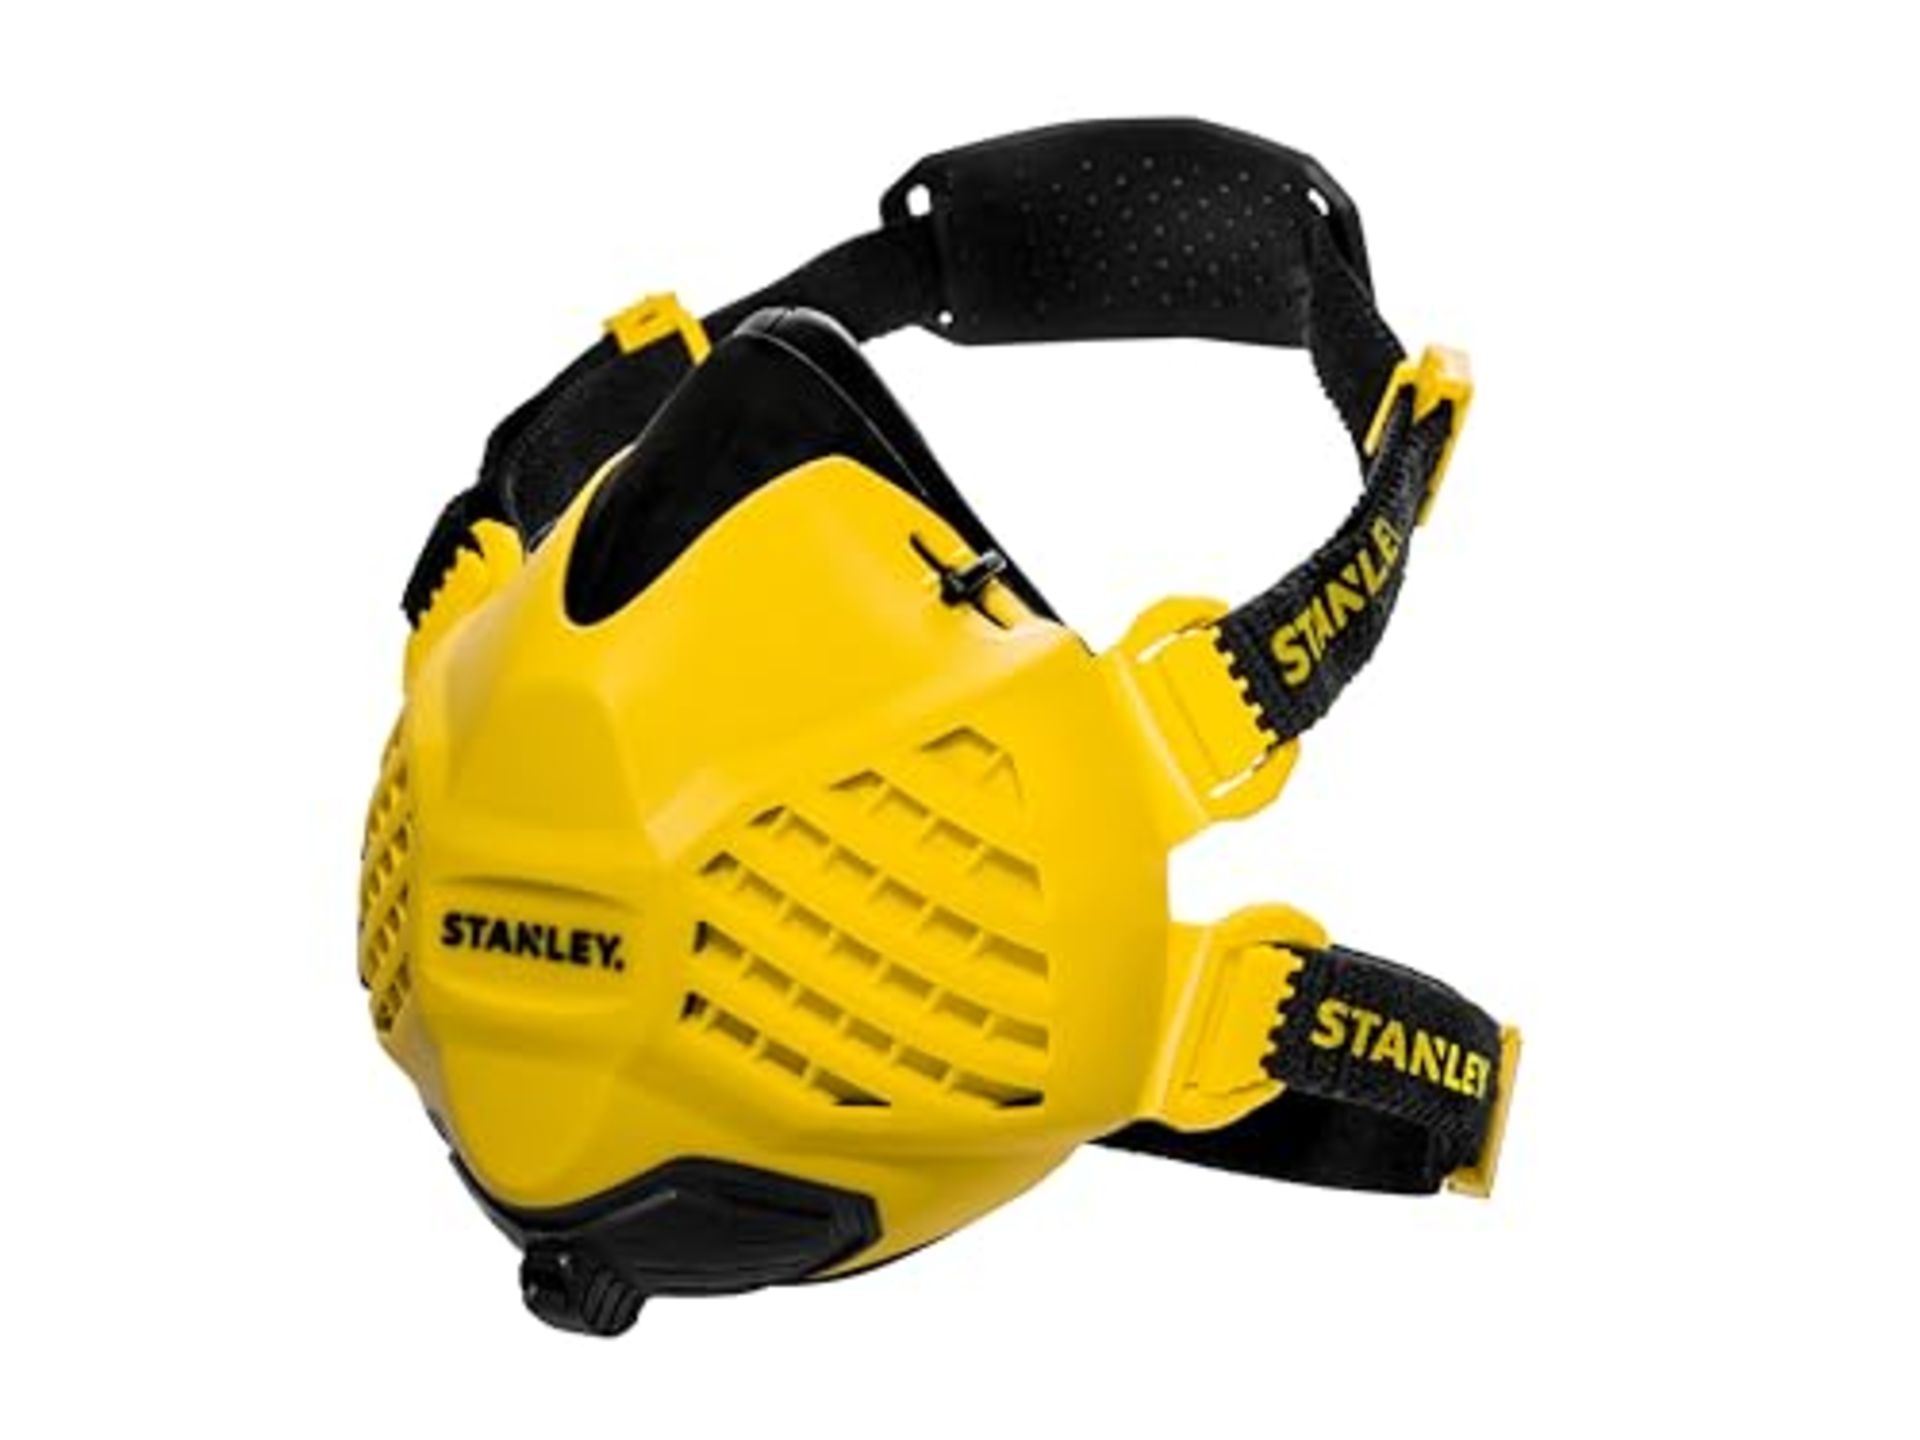 Stanley P3 Dust Mask, Reusable Respirator Mask with Face-Fit-Check Technology & Maximu